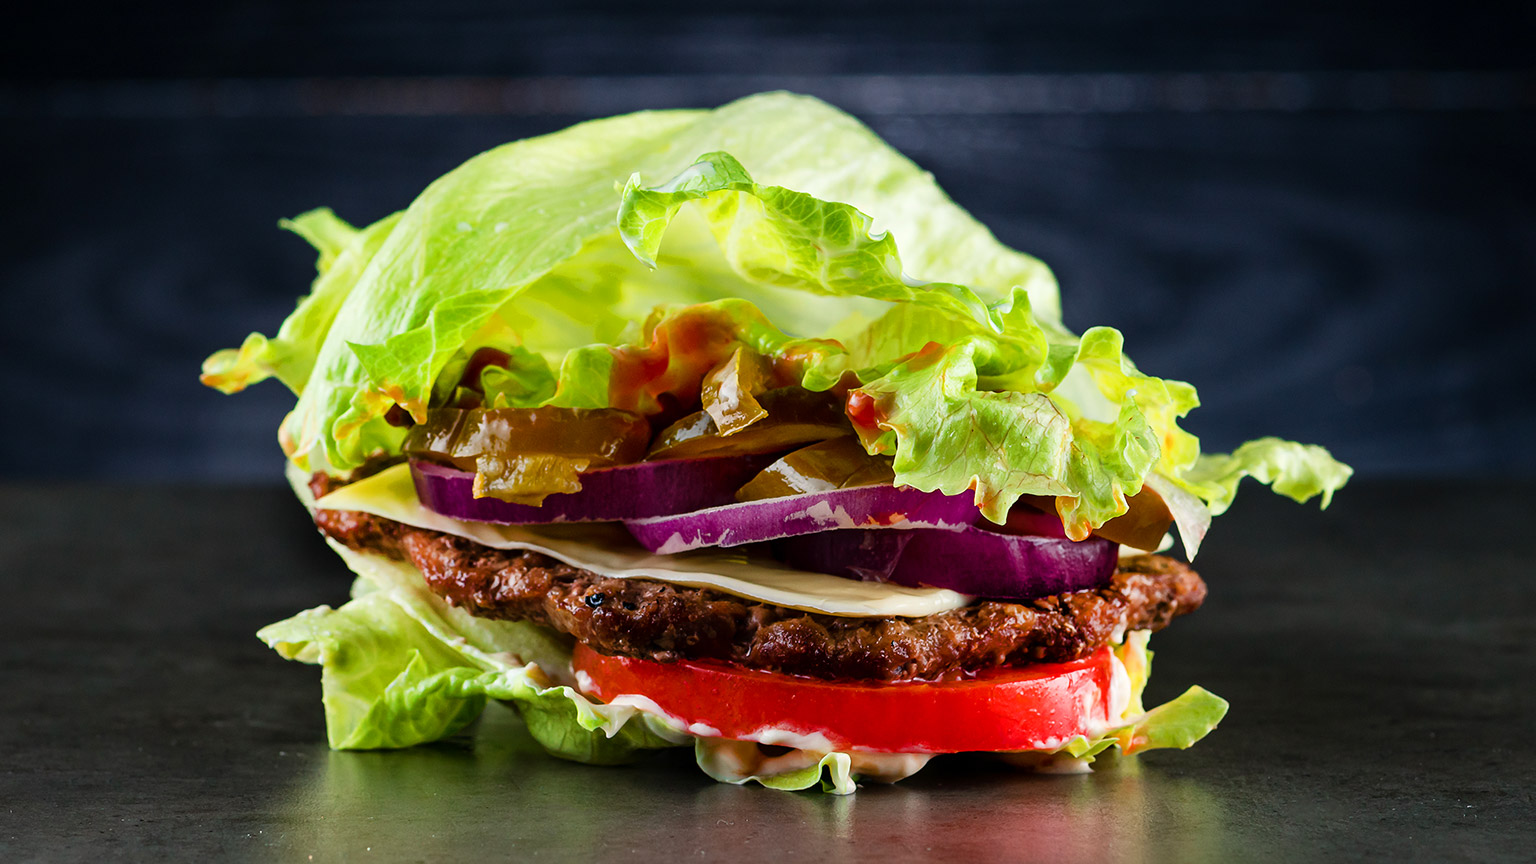 A burger wrapped in a lettuce leaf with various other toppings